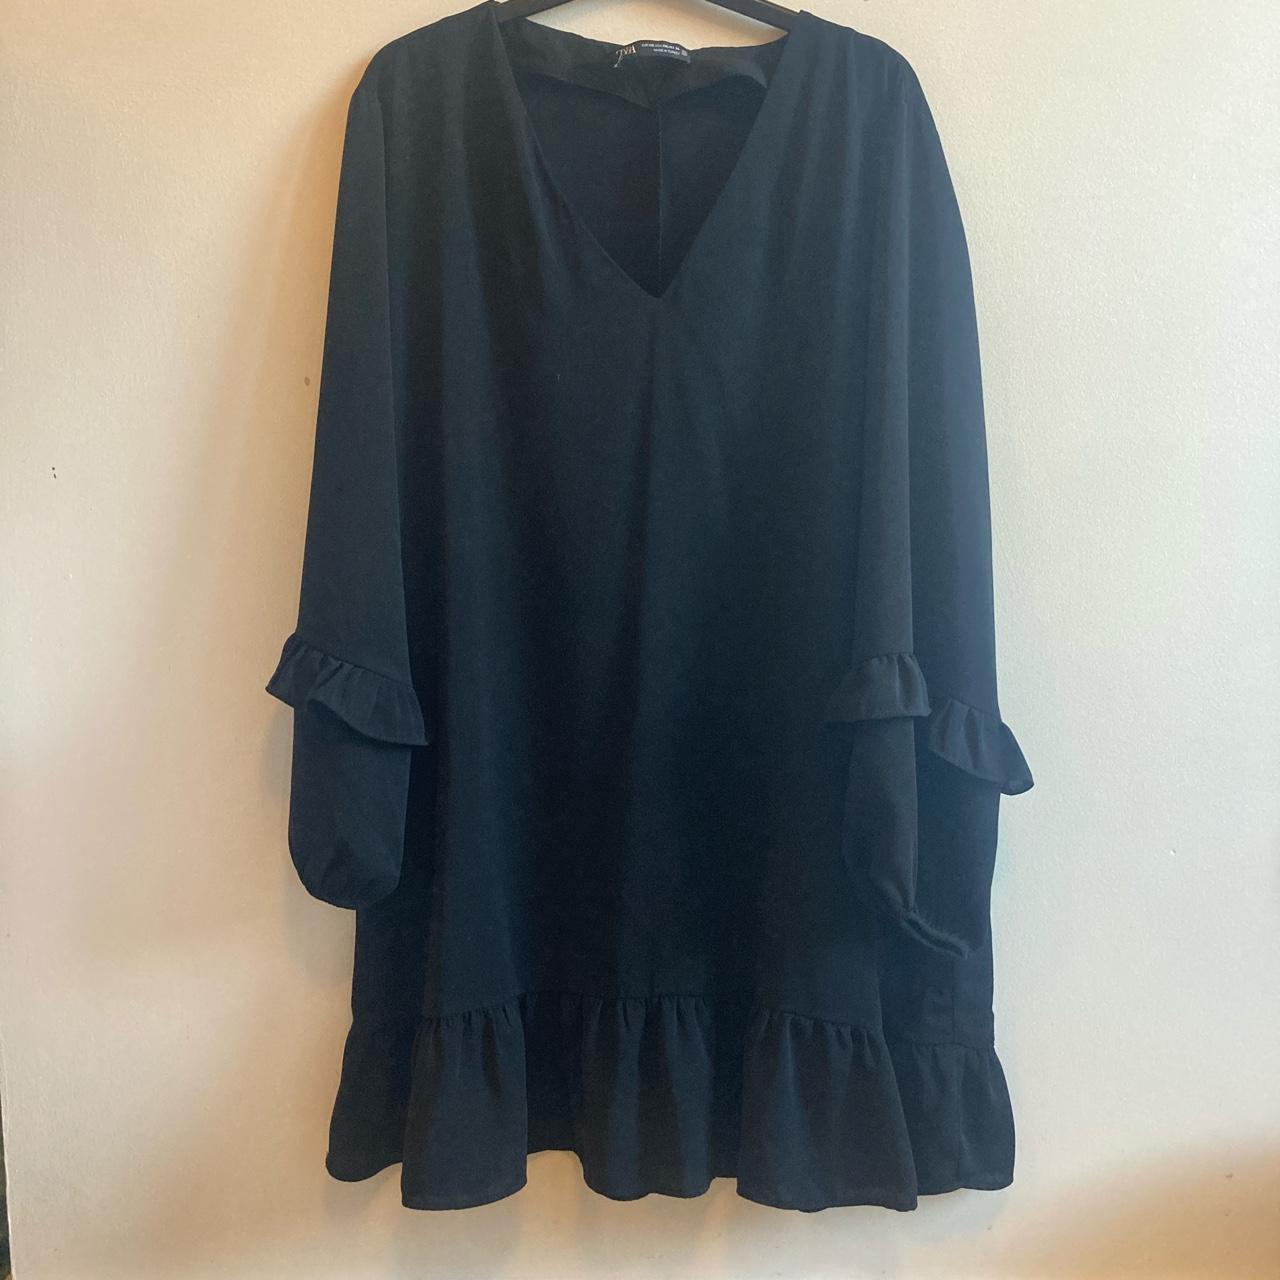 Zara black shift dress with frill on sleeves and... - Depop